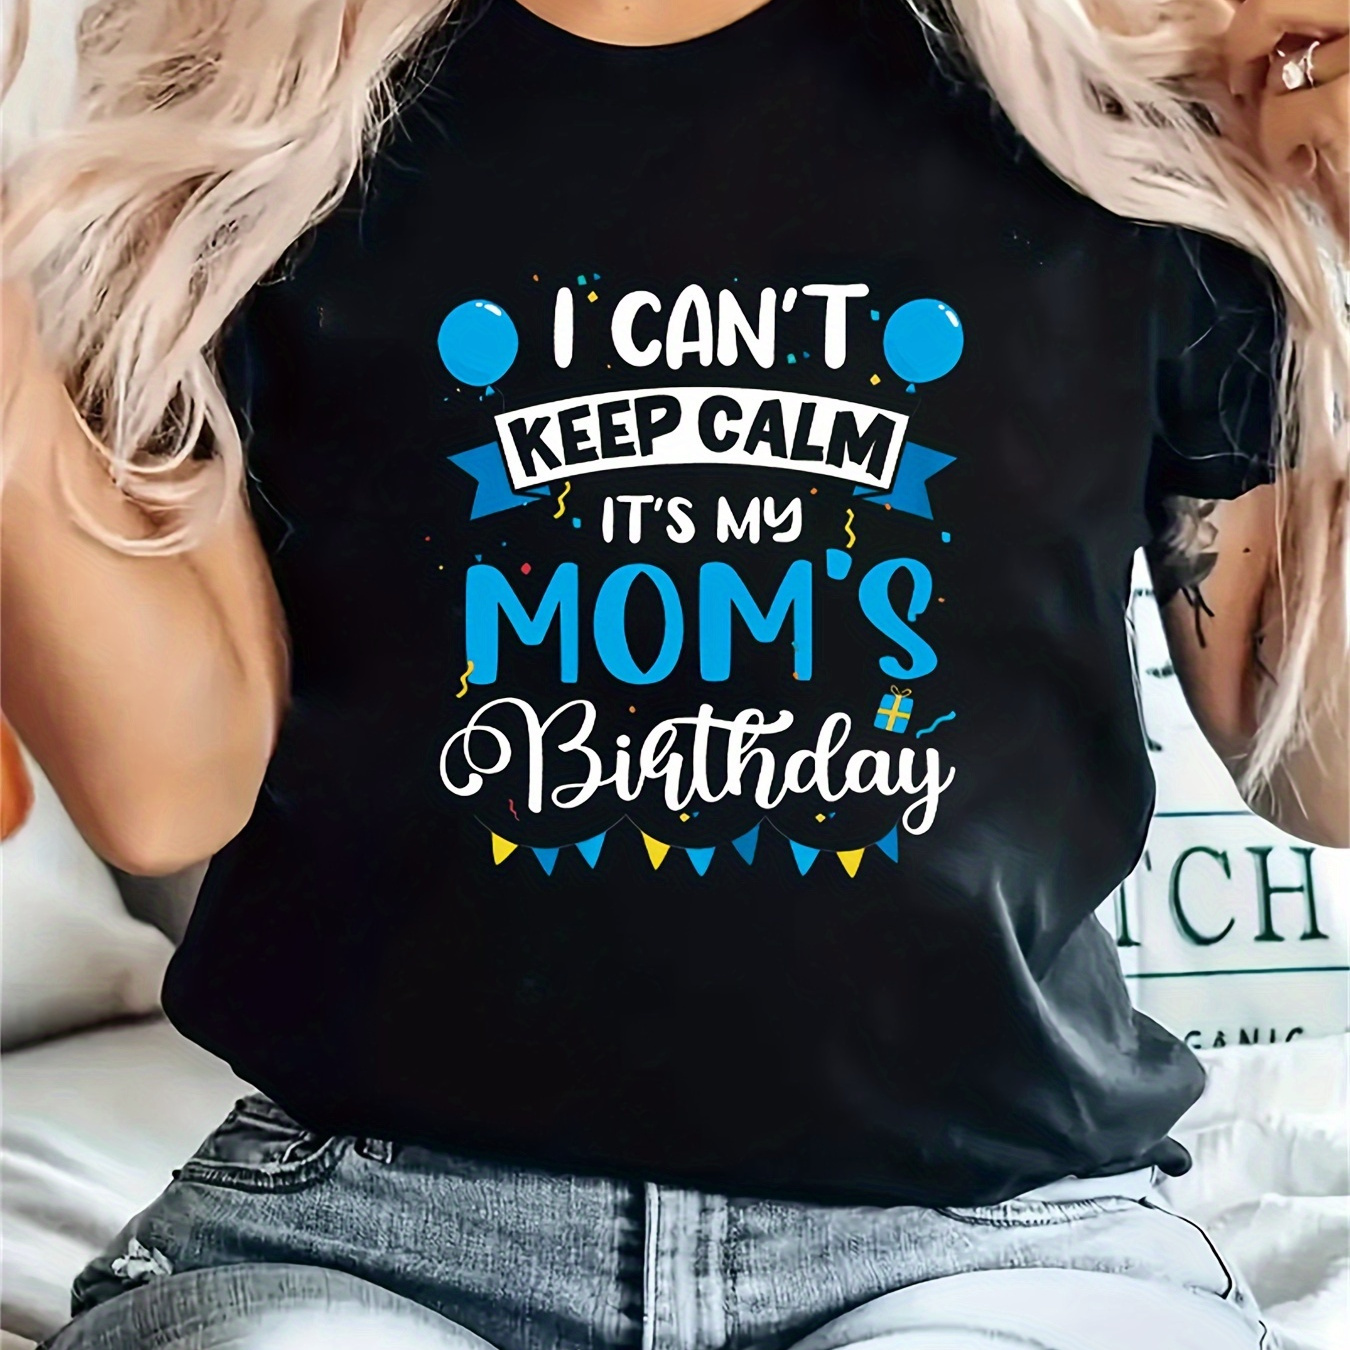 

Mom's Birthday Print Crew Neck T-shirt, Short Sleeve Casual Top For Summer & Spring, Women's Clothing